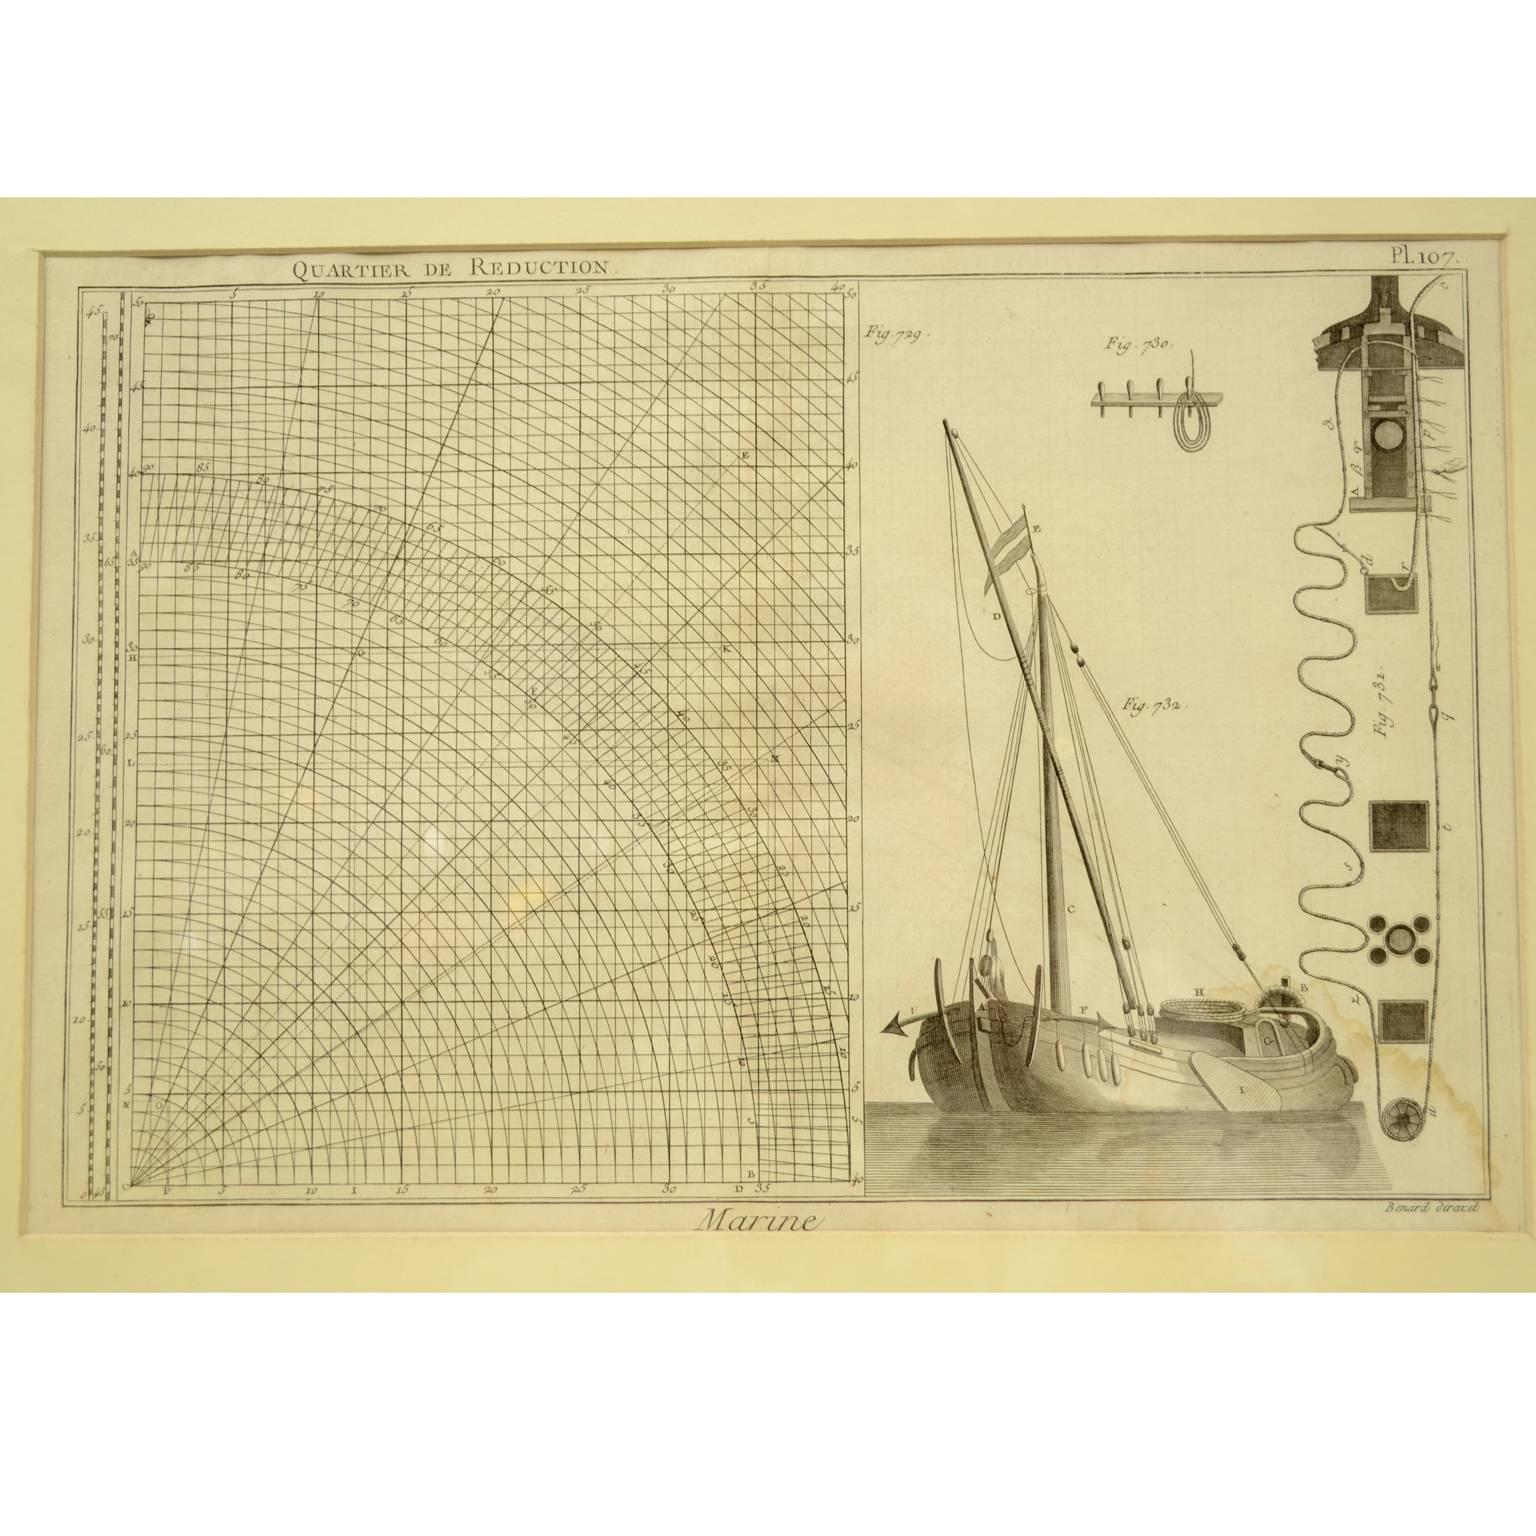 Print by engraving on copper plate from the Panckoucke Encyclopédie méthodique, end of the 18th century, volume Marine Planches (more than 1,500 figures dealing with all subjects on the marina: planes, construction, carpentry, tree trunks, armaments